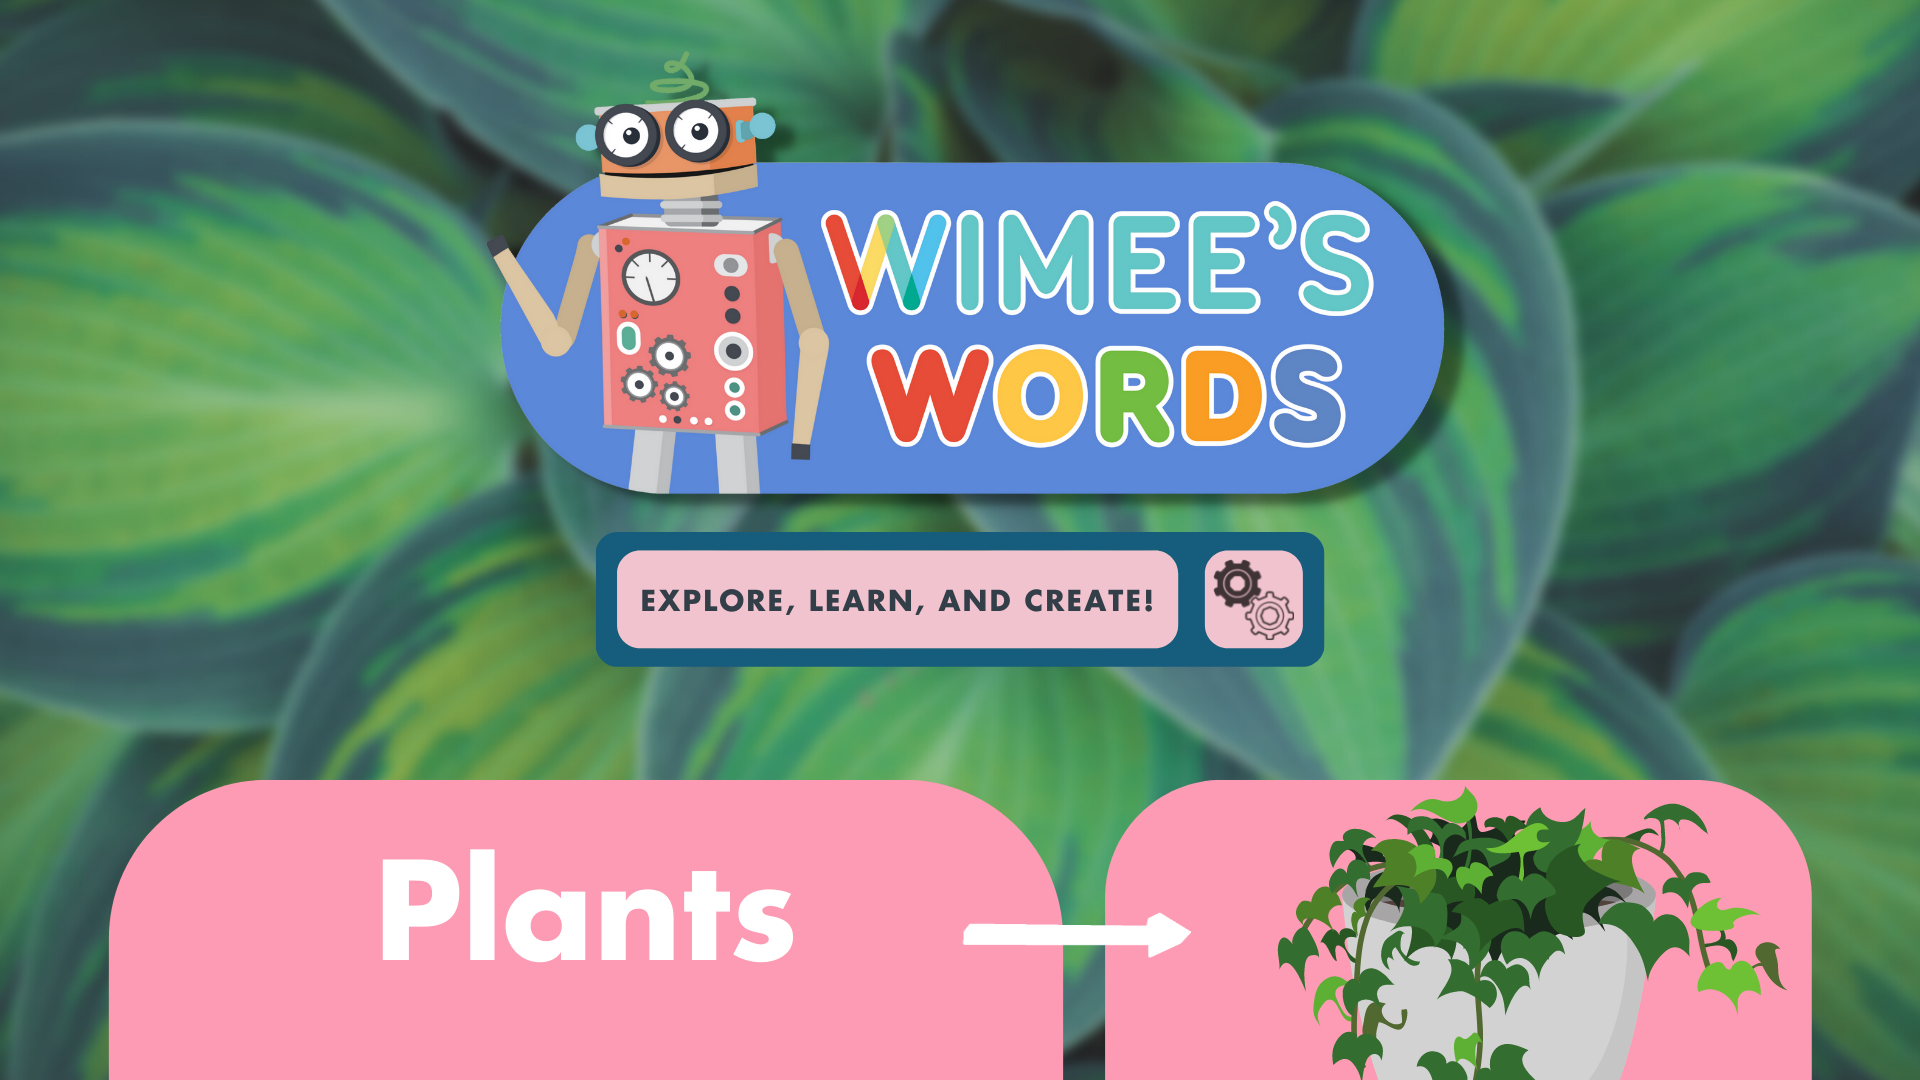 A close-ip illustration of a leafy plant. The Wimee's Words logo, the title 